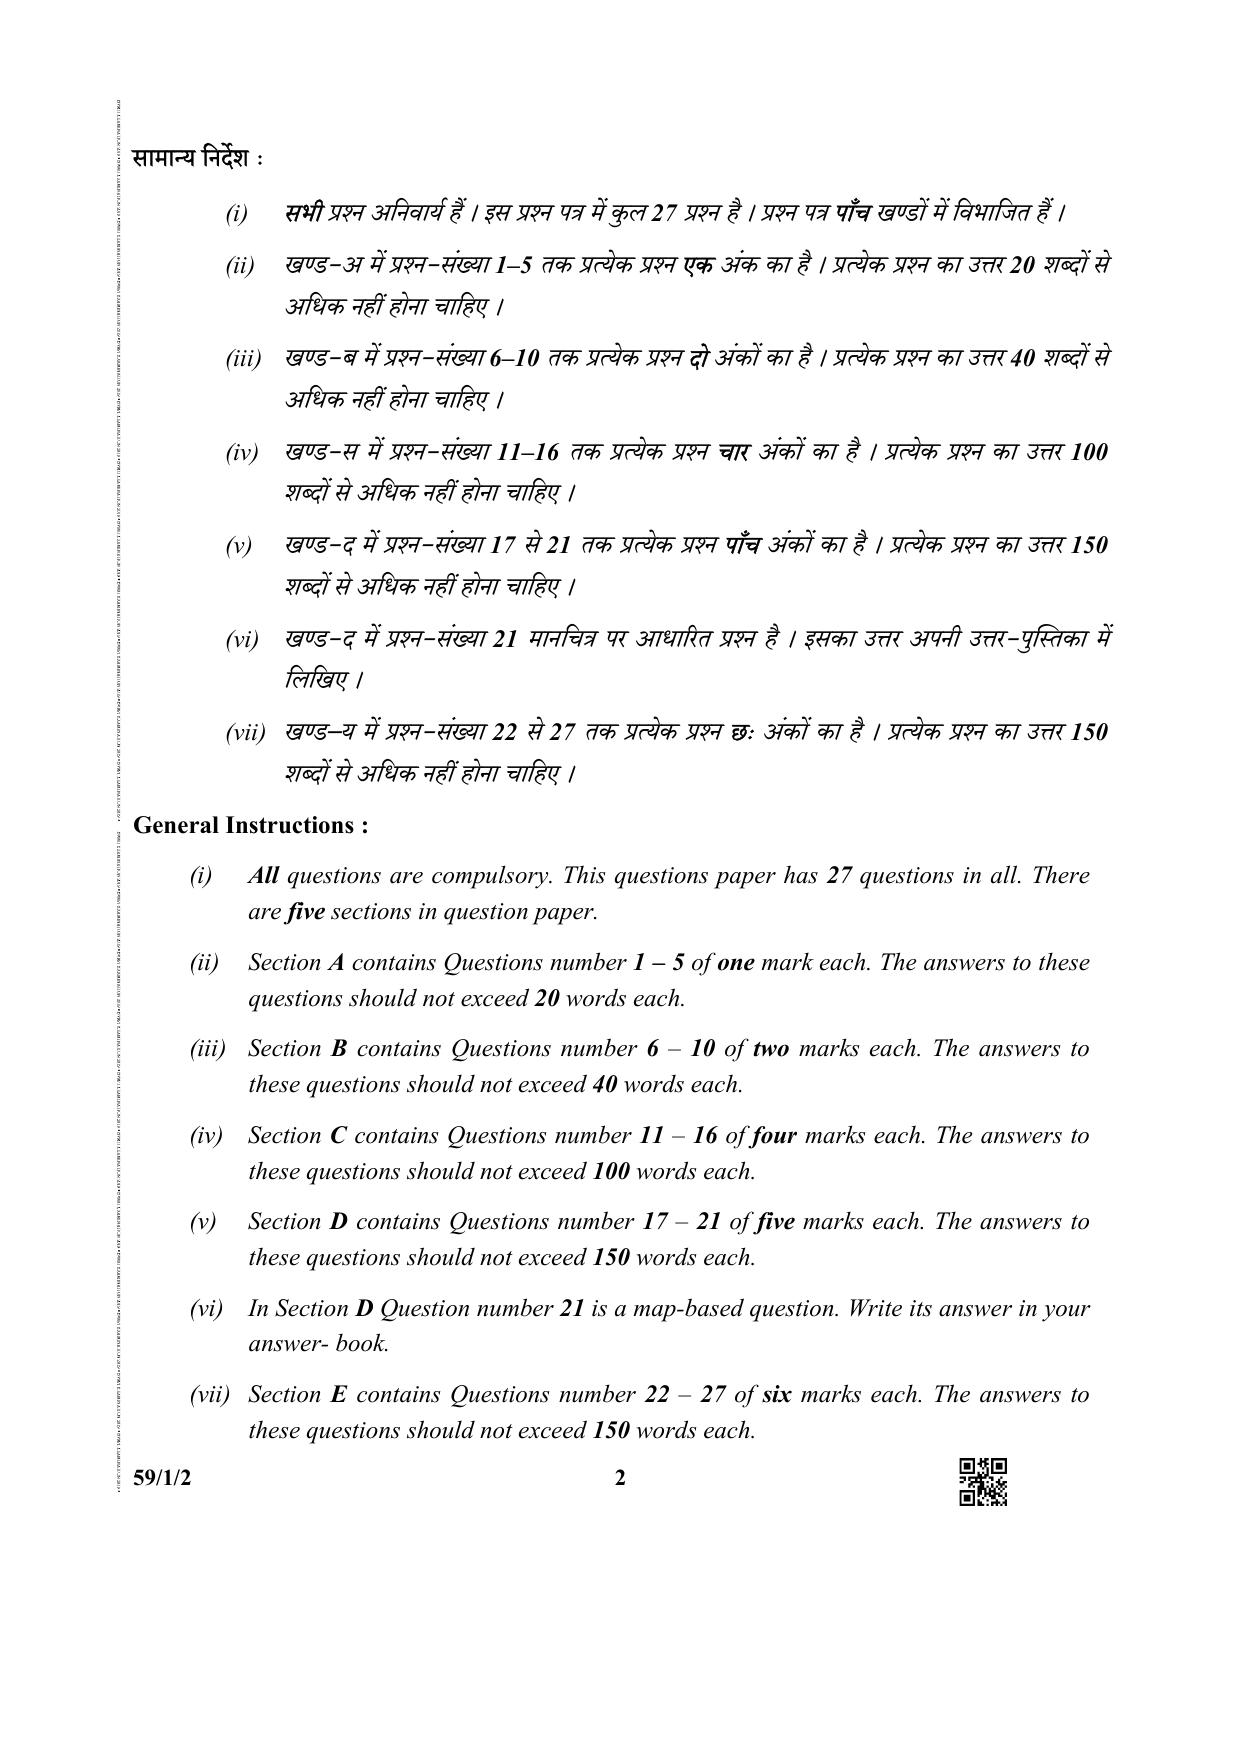 CBSE Class 12 59-1-2 (Political Science) 2019 Question Paper - Page 2